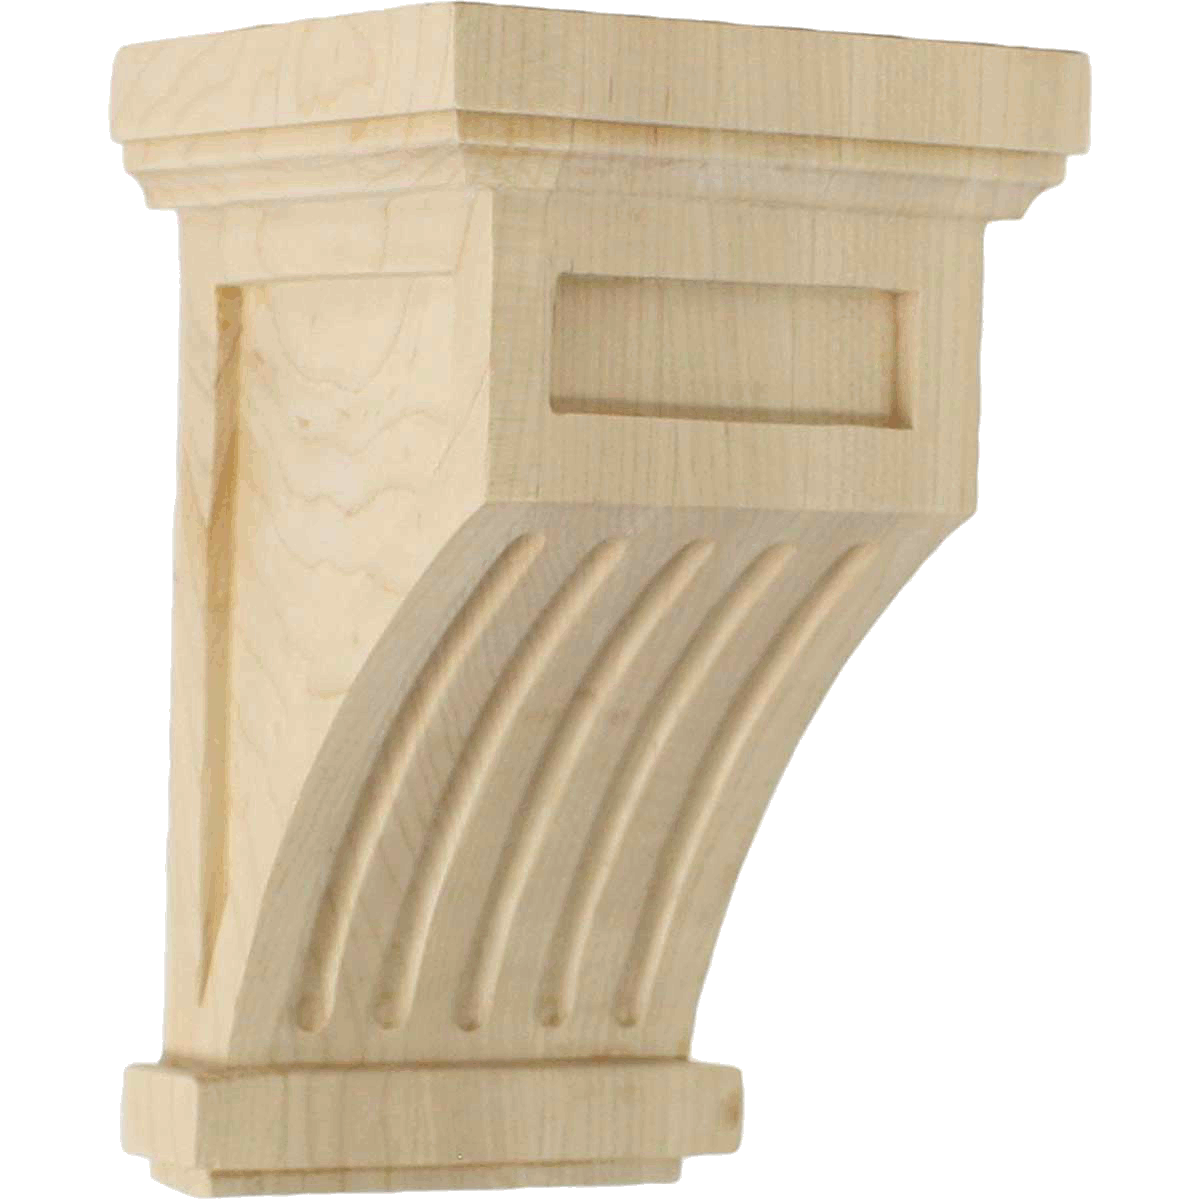 Fluted corbels